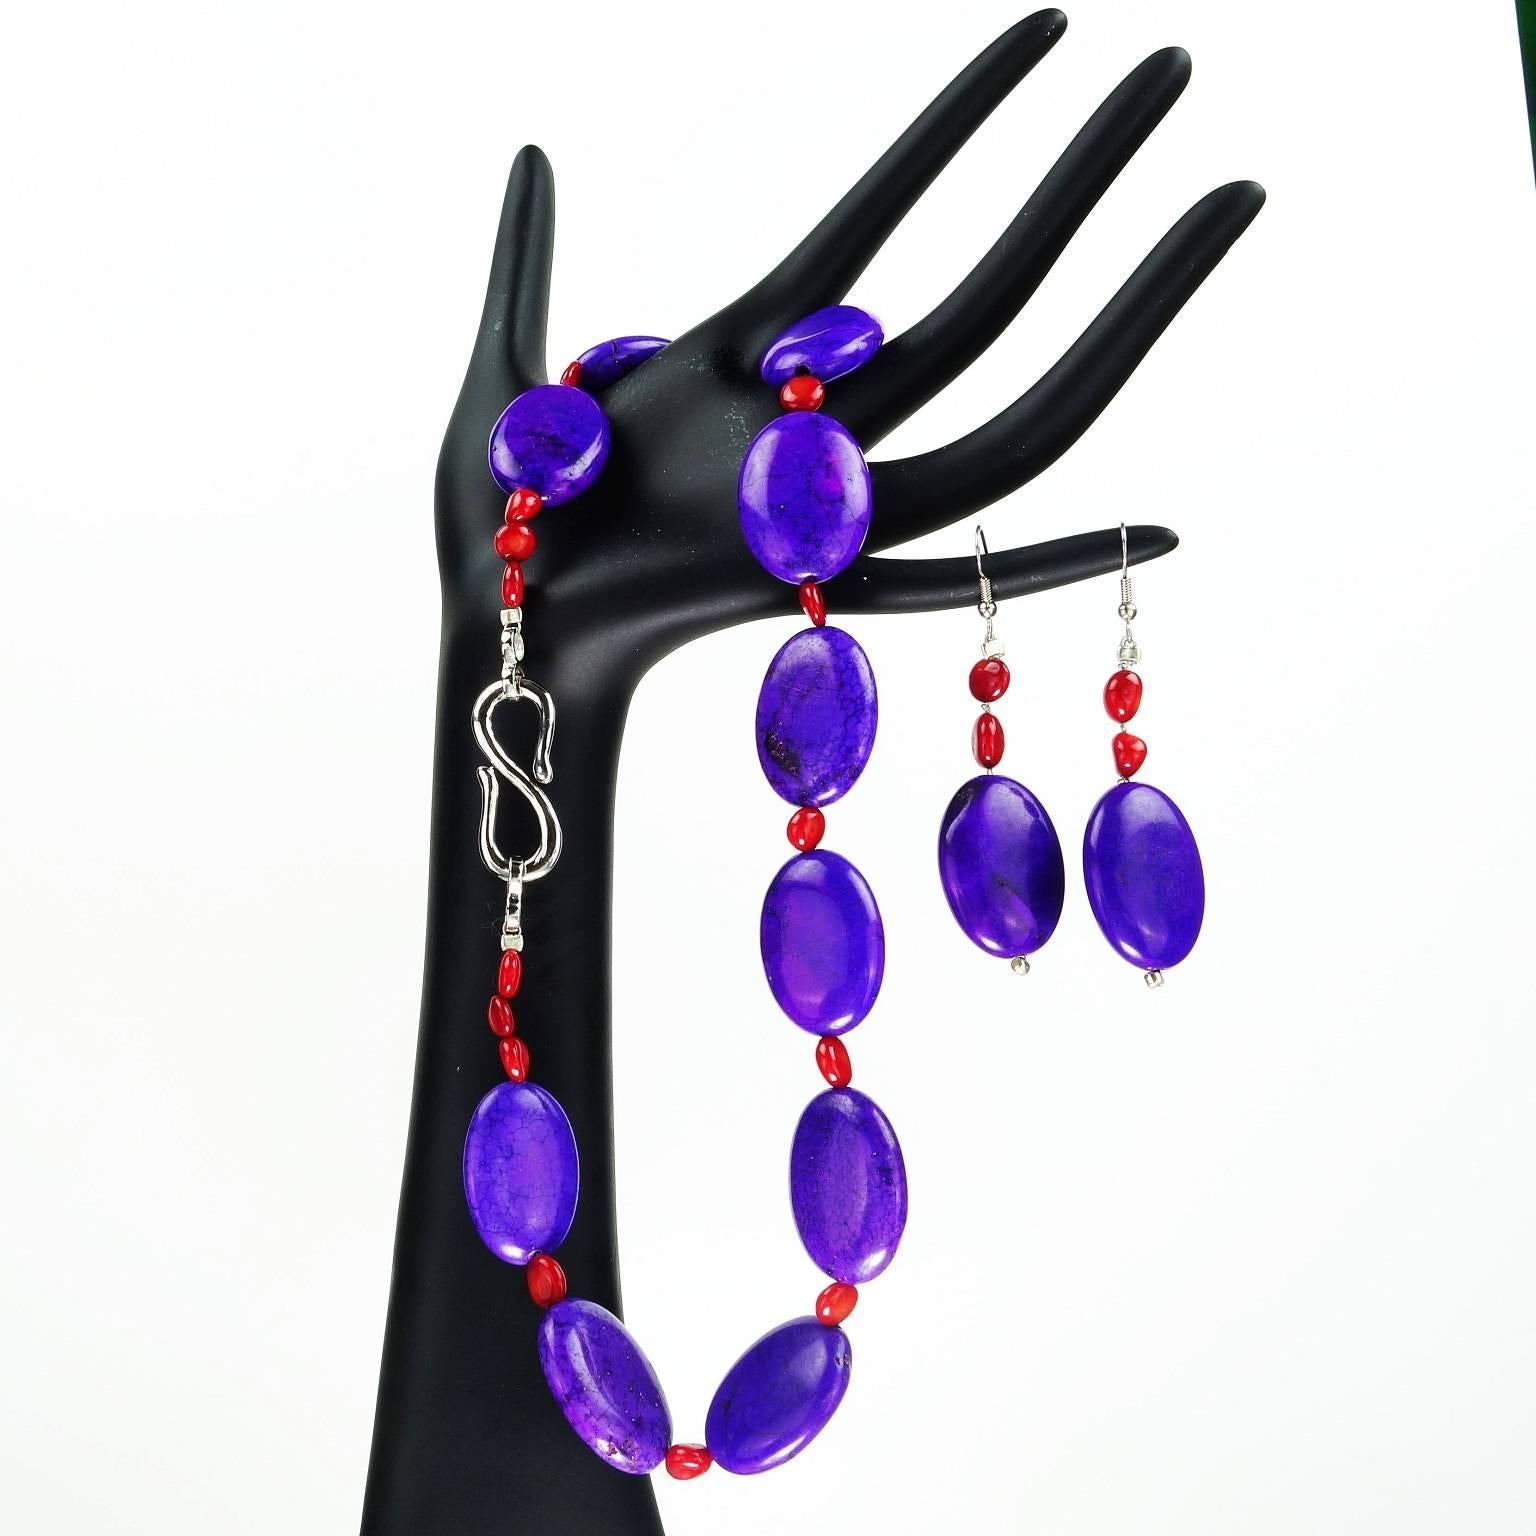 Unique Bright purple oval beaded necklace with coral accents and matching earrings. Dyed purple magnesite pops with orange coral- great colors for a cruise or the warmer climates! Silver-tone S clasp closure. Great price point for such a strong look.